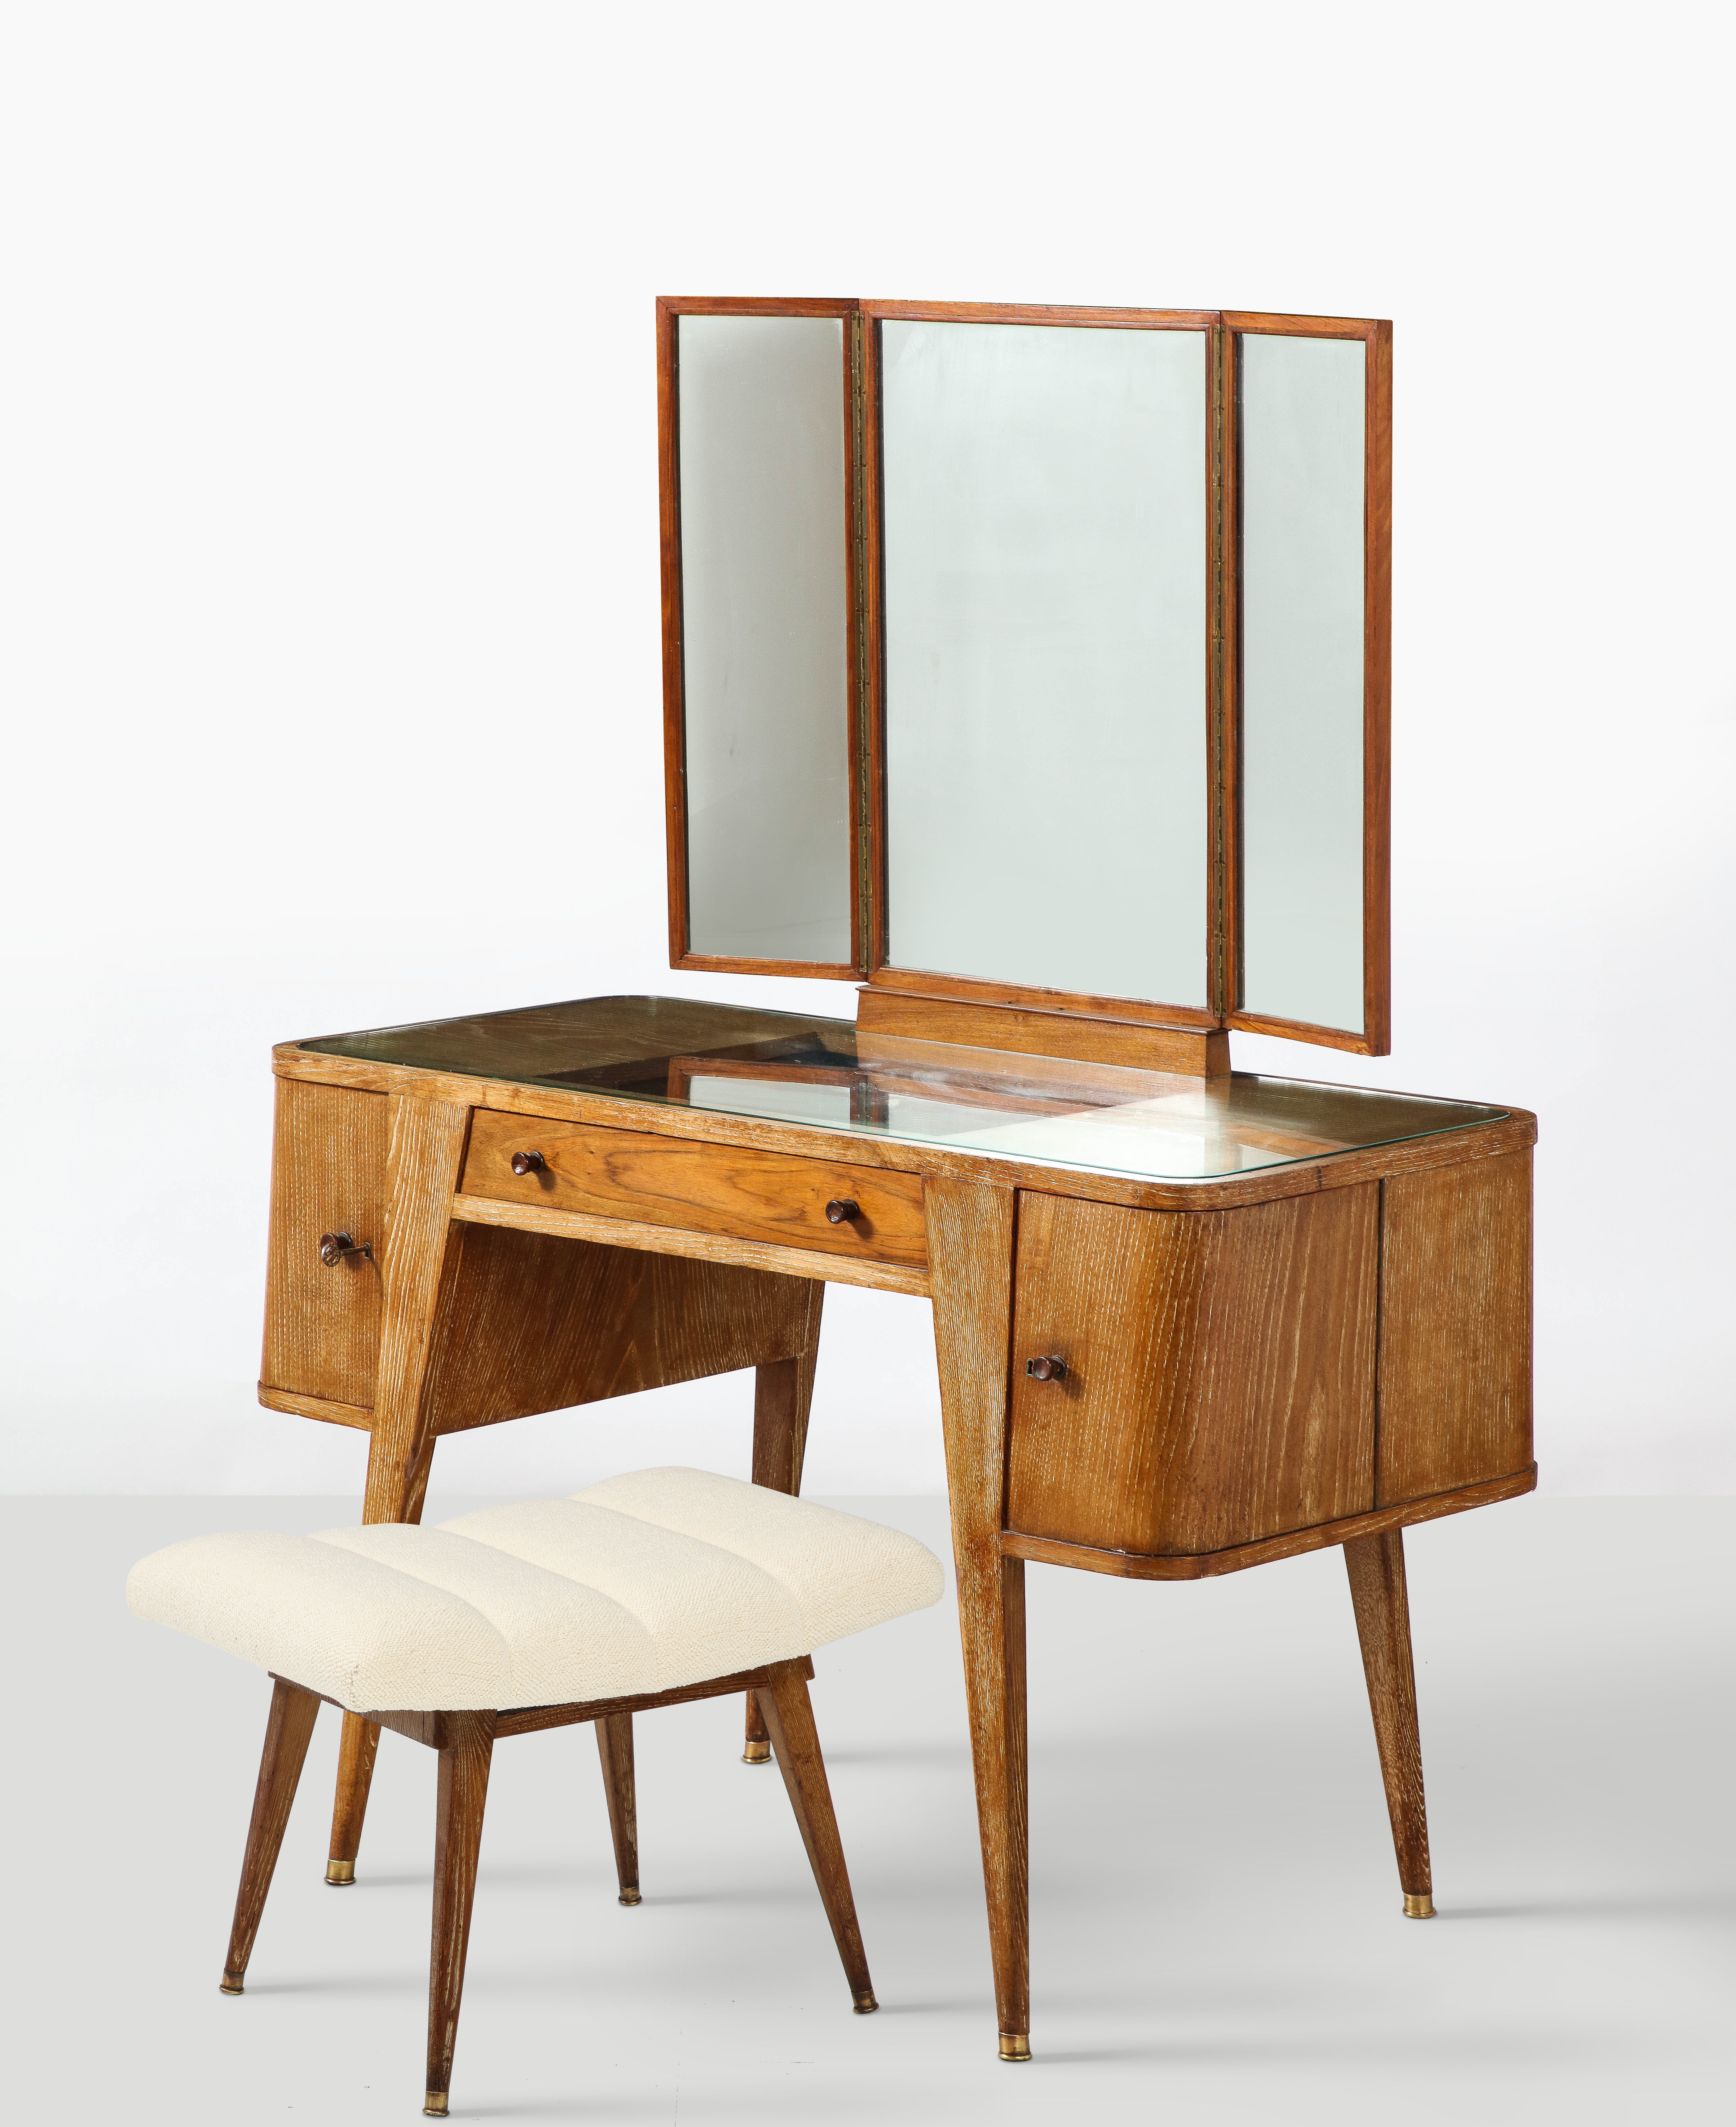 A rare and elegant Italian 1940's cerused oak vanity table and accompanying stool/bench. The vanity table has one drawer centered on the apron, with two curved corner doors on either end which open out, the right side door with two interior shelves